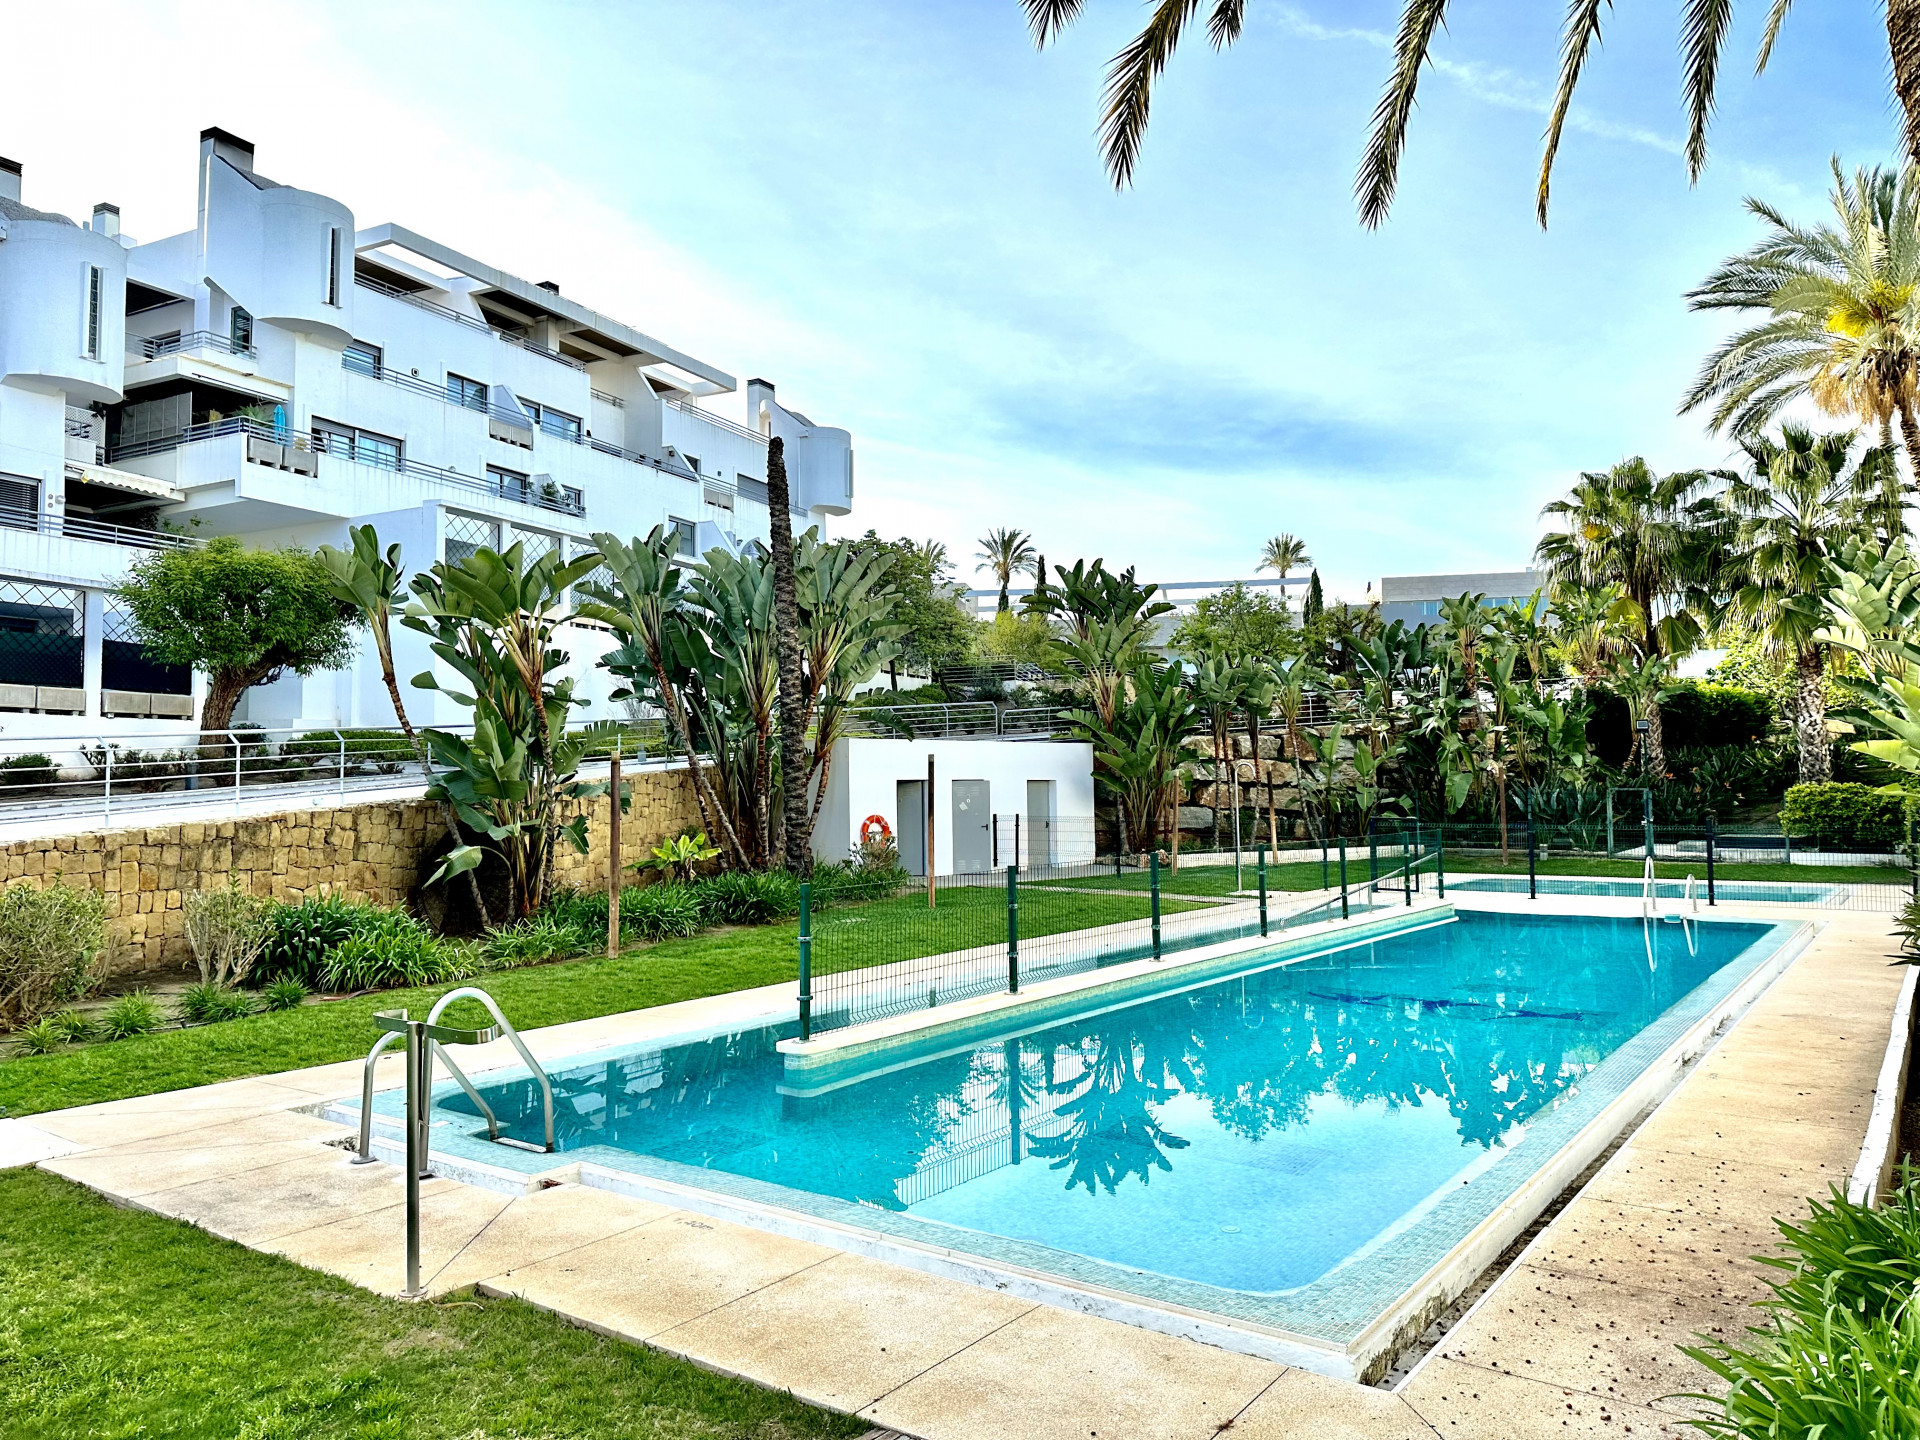 Apartment for sale in Mijas 7